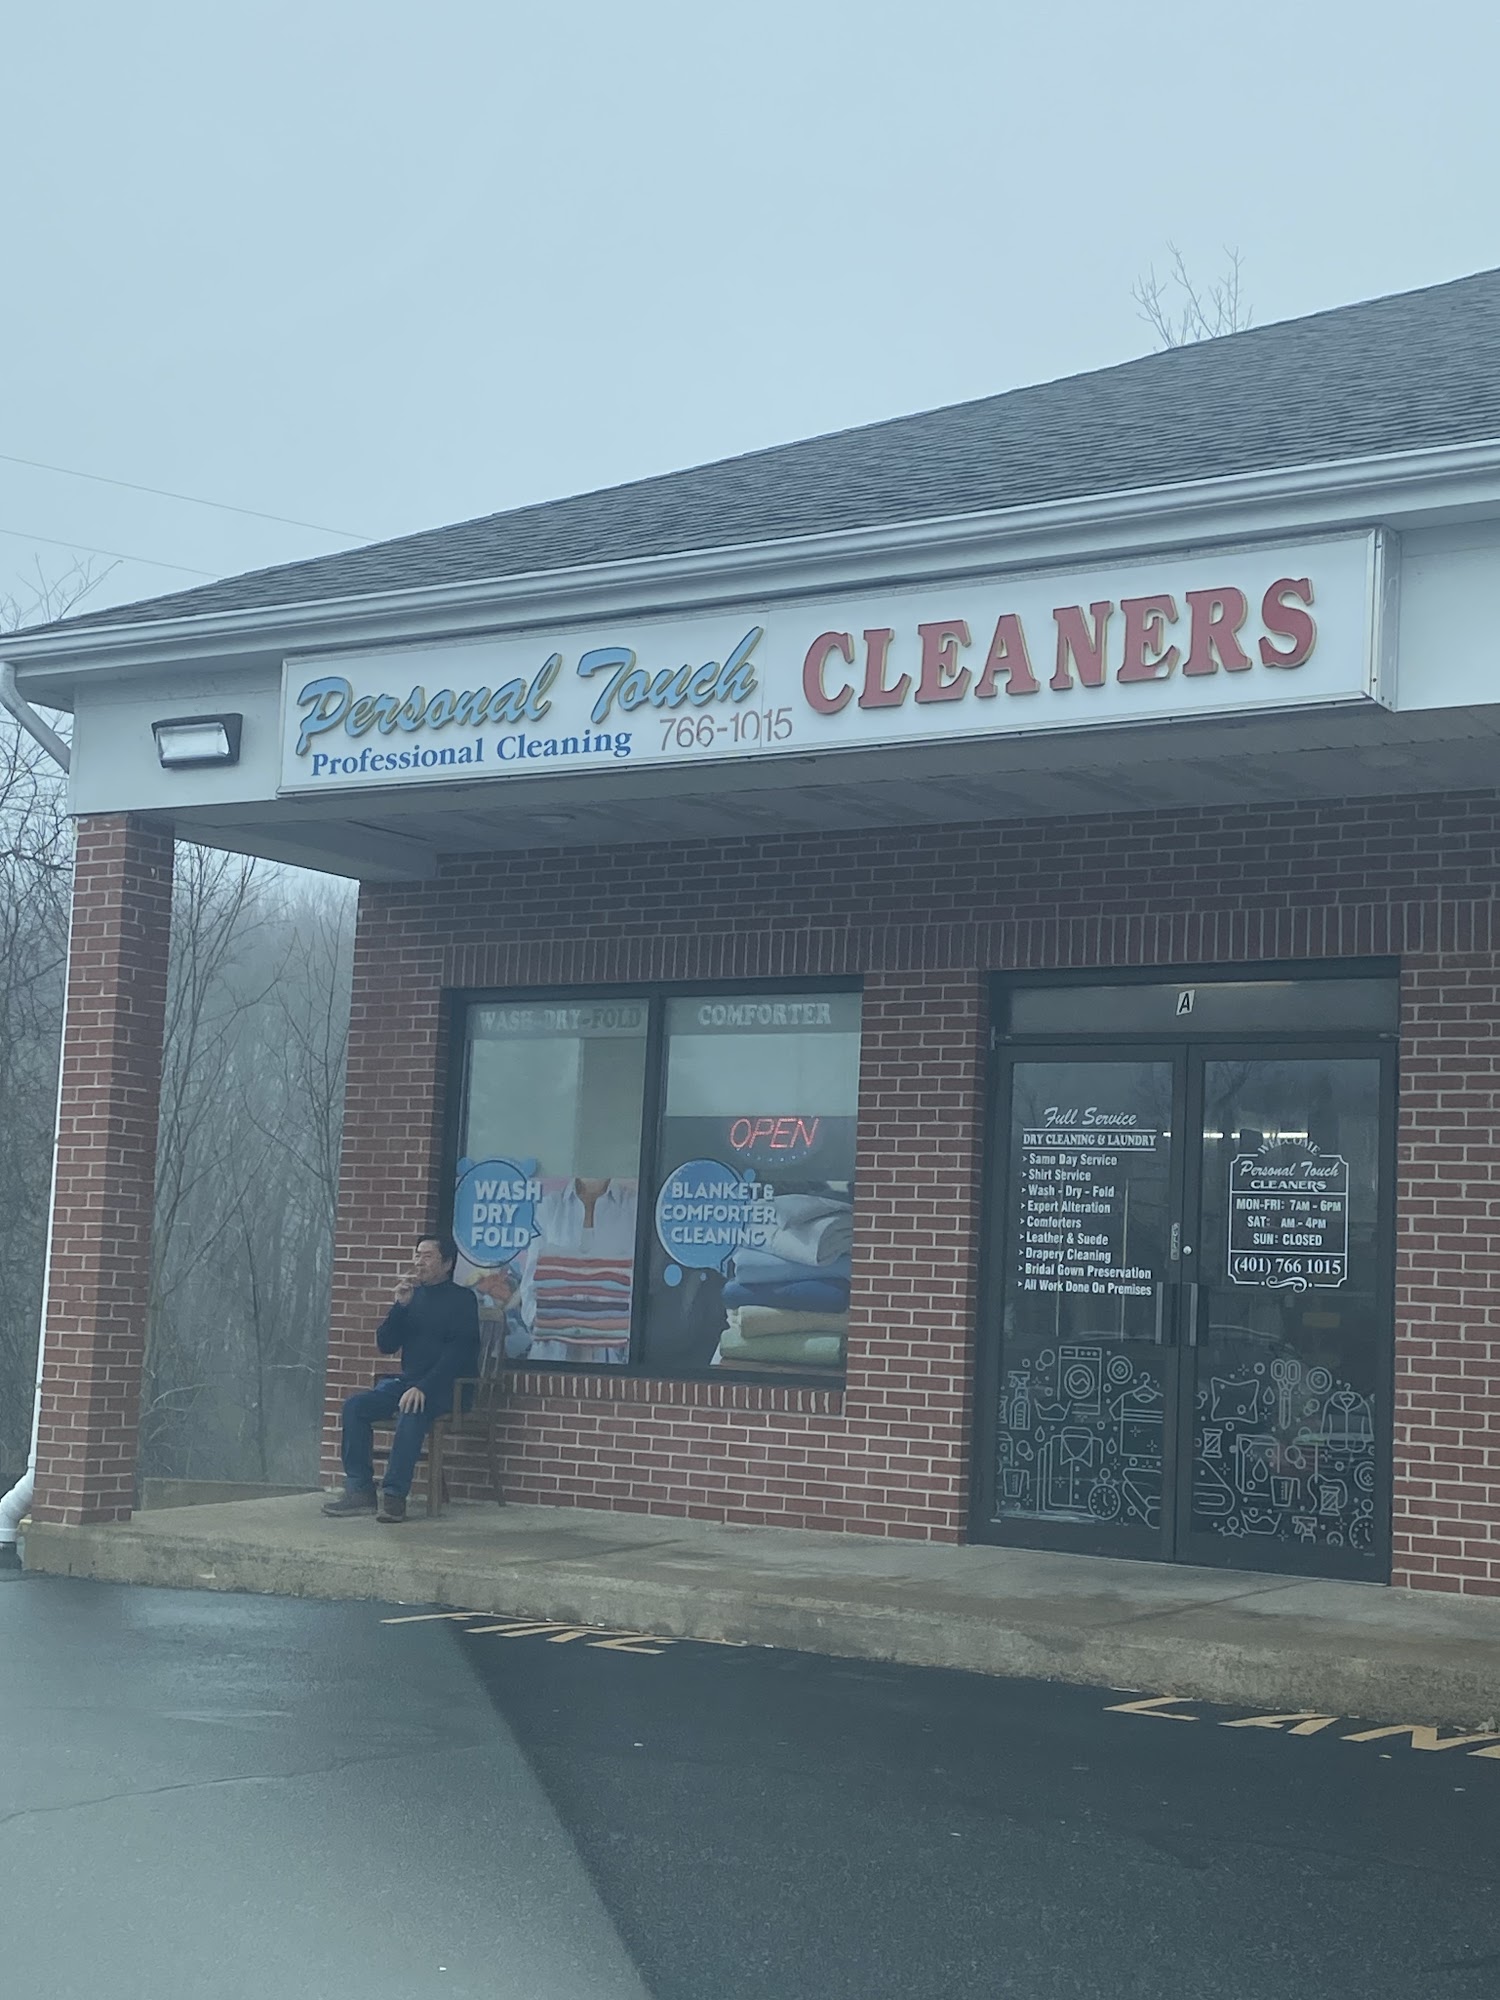 Personal Touch Cleaners